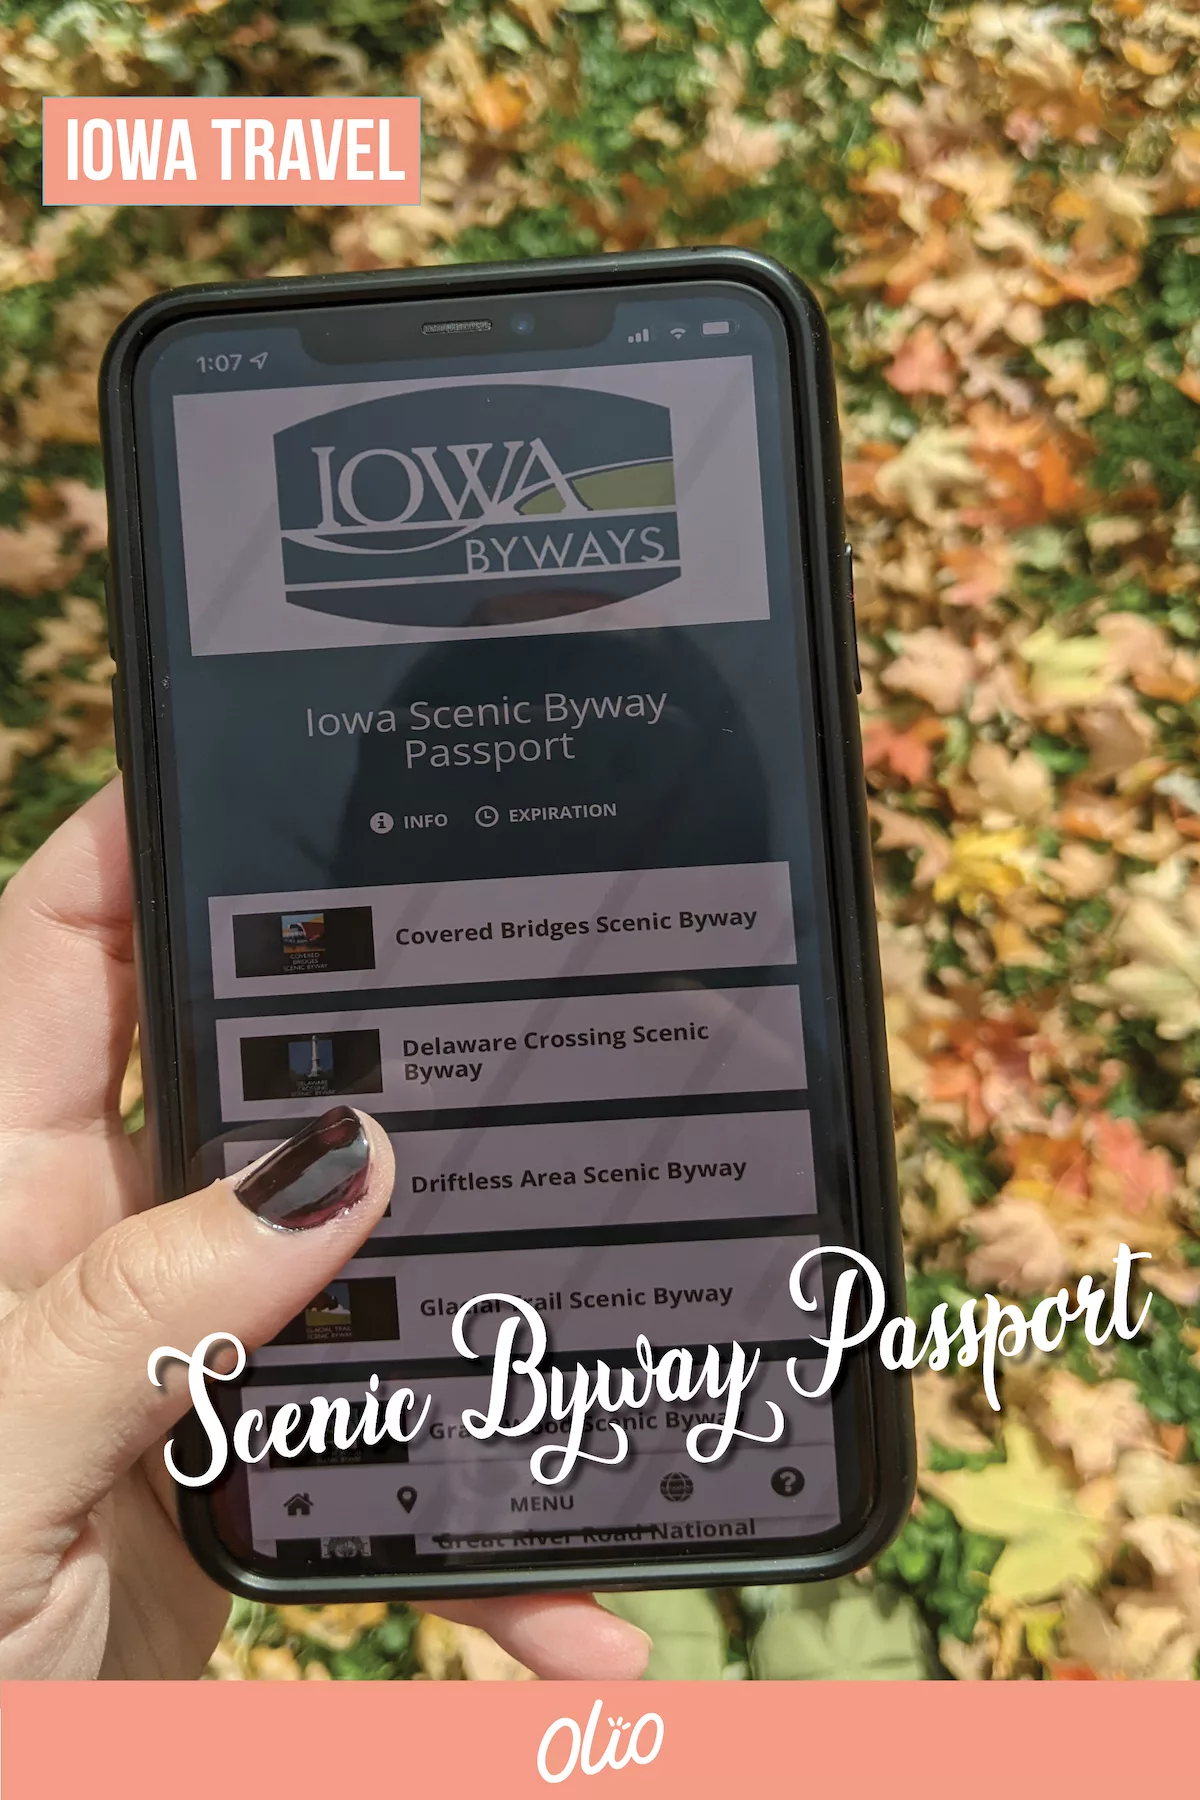 Looking for a road trip adventure? Choose one of Iowa’s beautiful scenic byways and hit the road! And now it’s easier than ever to find places to stop, attractions to explore and so much more thanks to the Iowa Scenic Byway Passport. This free digital passport is easy to use and offers tons of opportunities to discover new places across the state. Learn more about how to get a passport of your own and discover some of the beautiful scenic byways you can explore yourself. #ThisIsIowa @IowaTourism